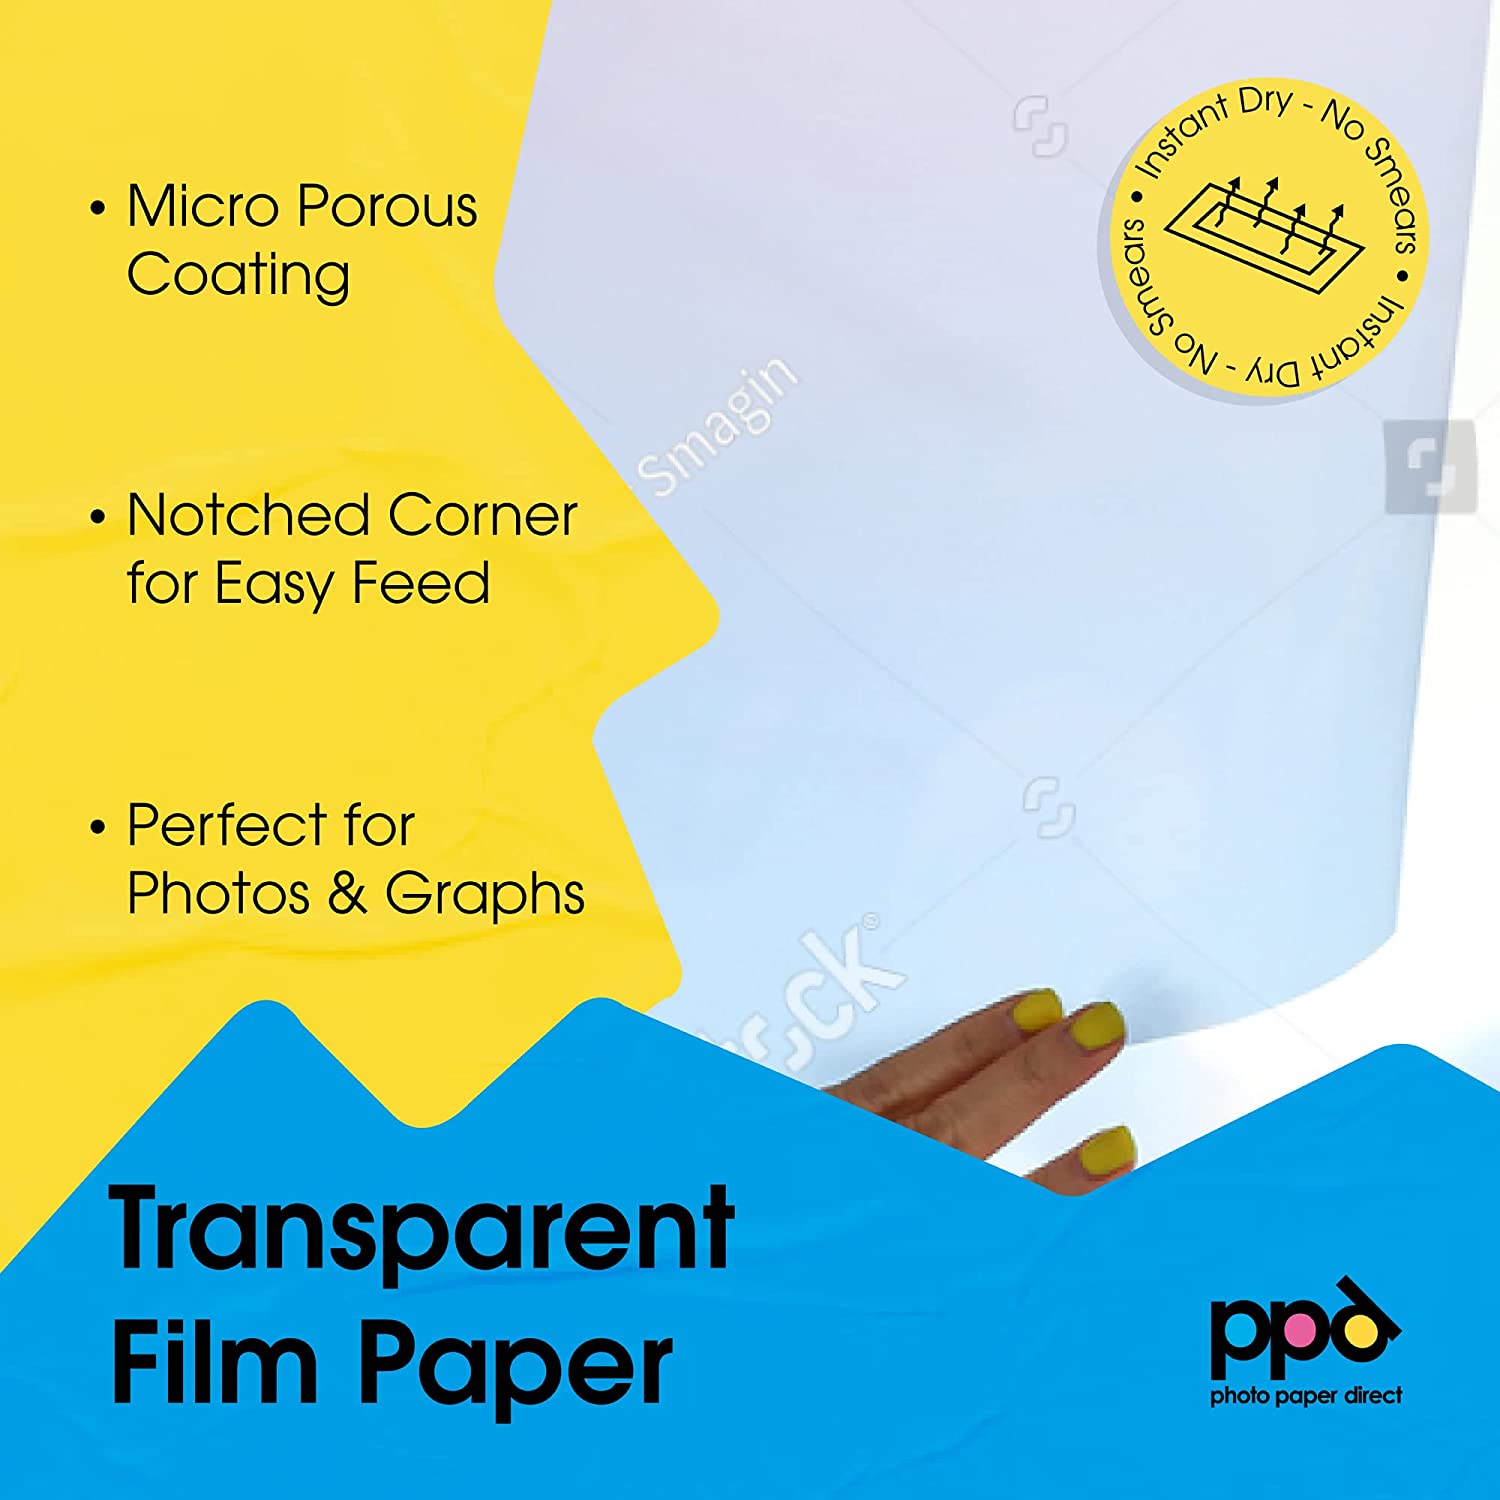 PPD Inkjet Transparencies Overhead Projector Film (OHP film) 8.5 x 11 5 Mil PPD-34